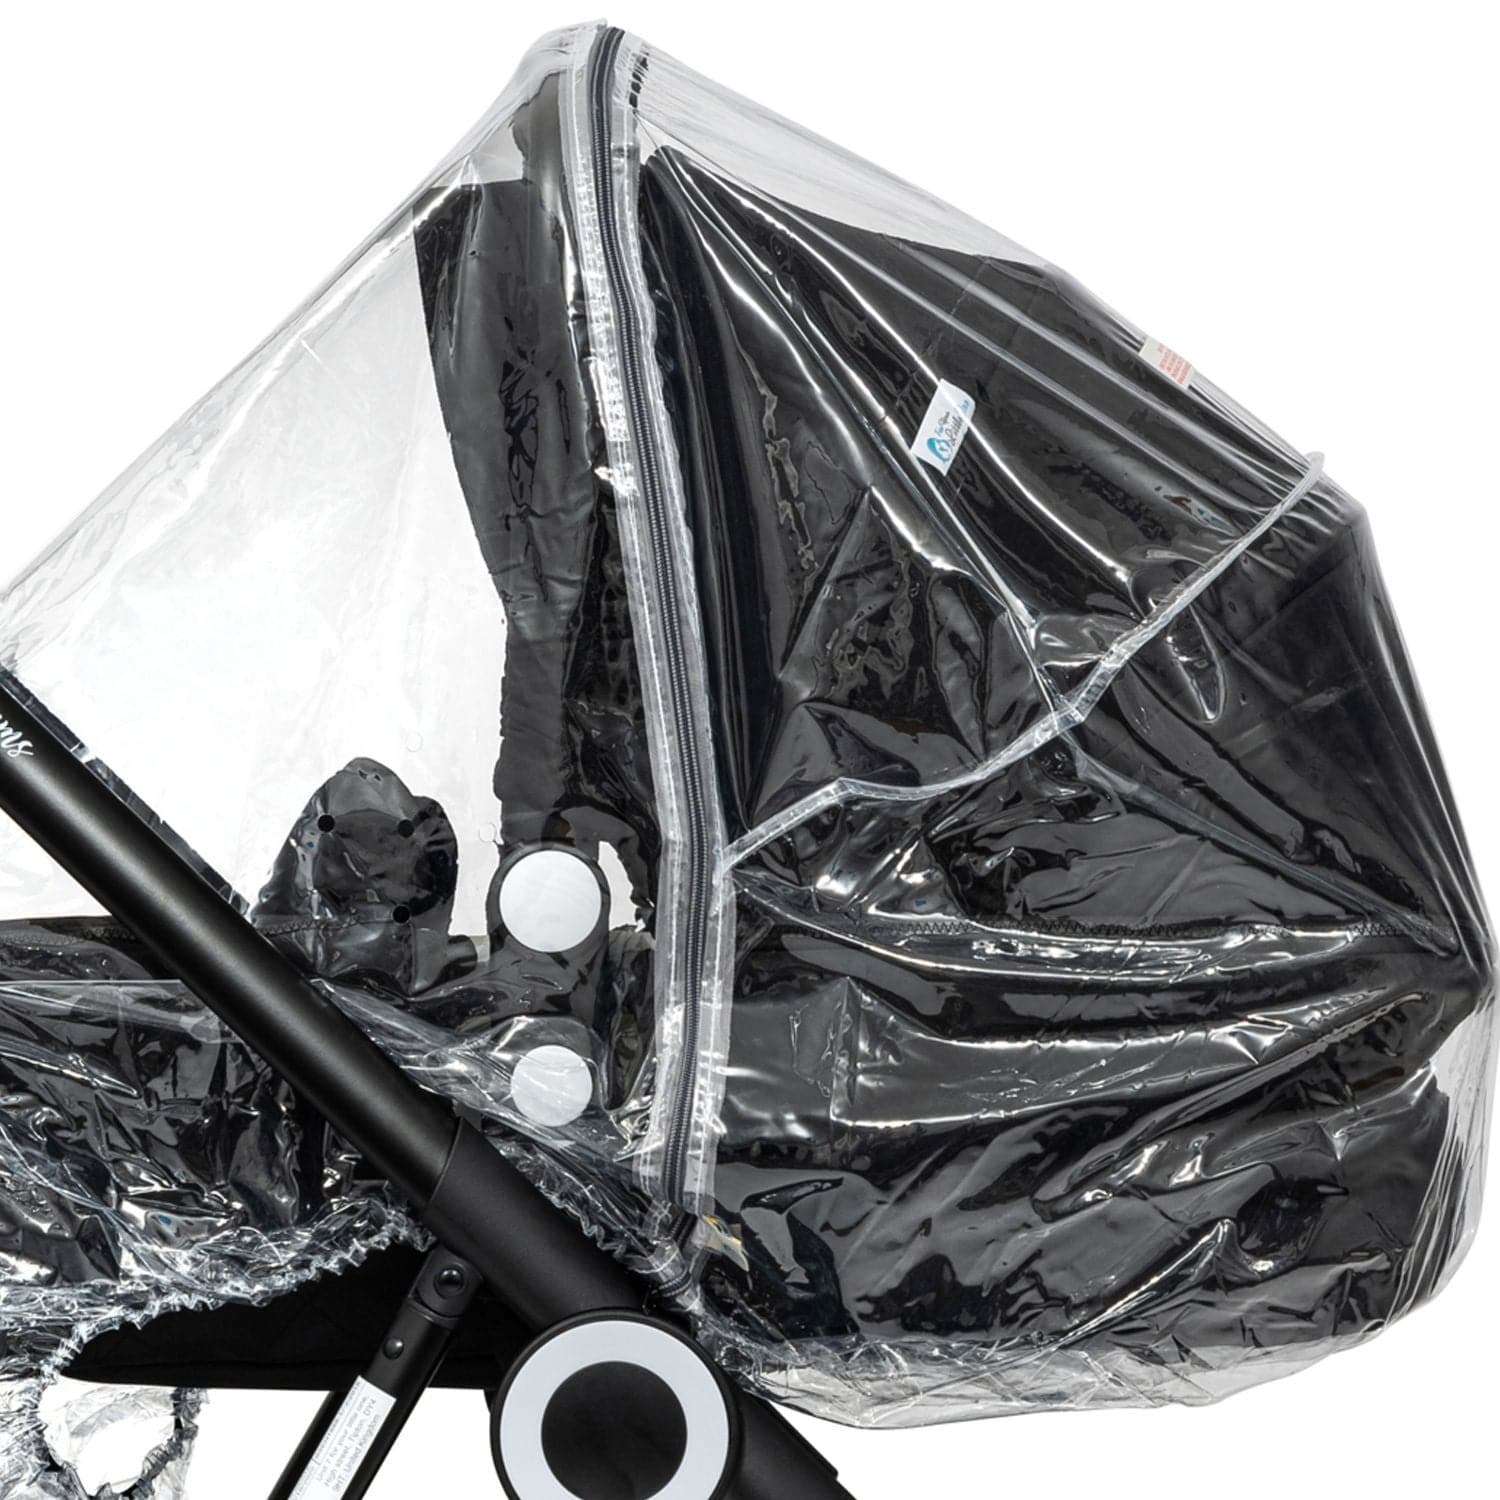 Carrycot Raincover Compatible With Cam - Fits All Models - For Your Little One